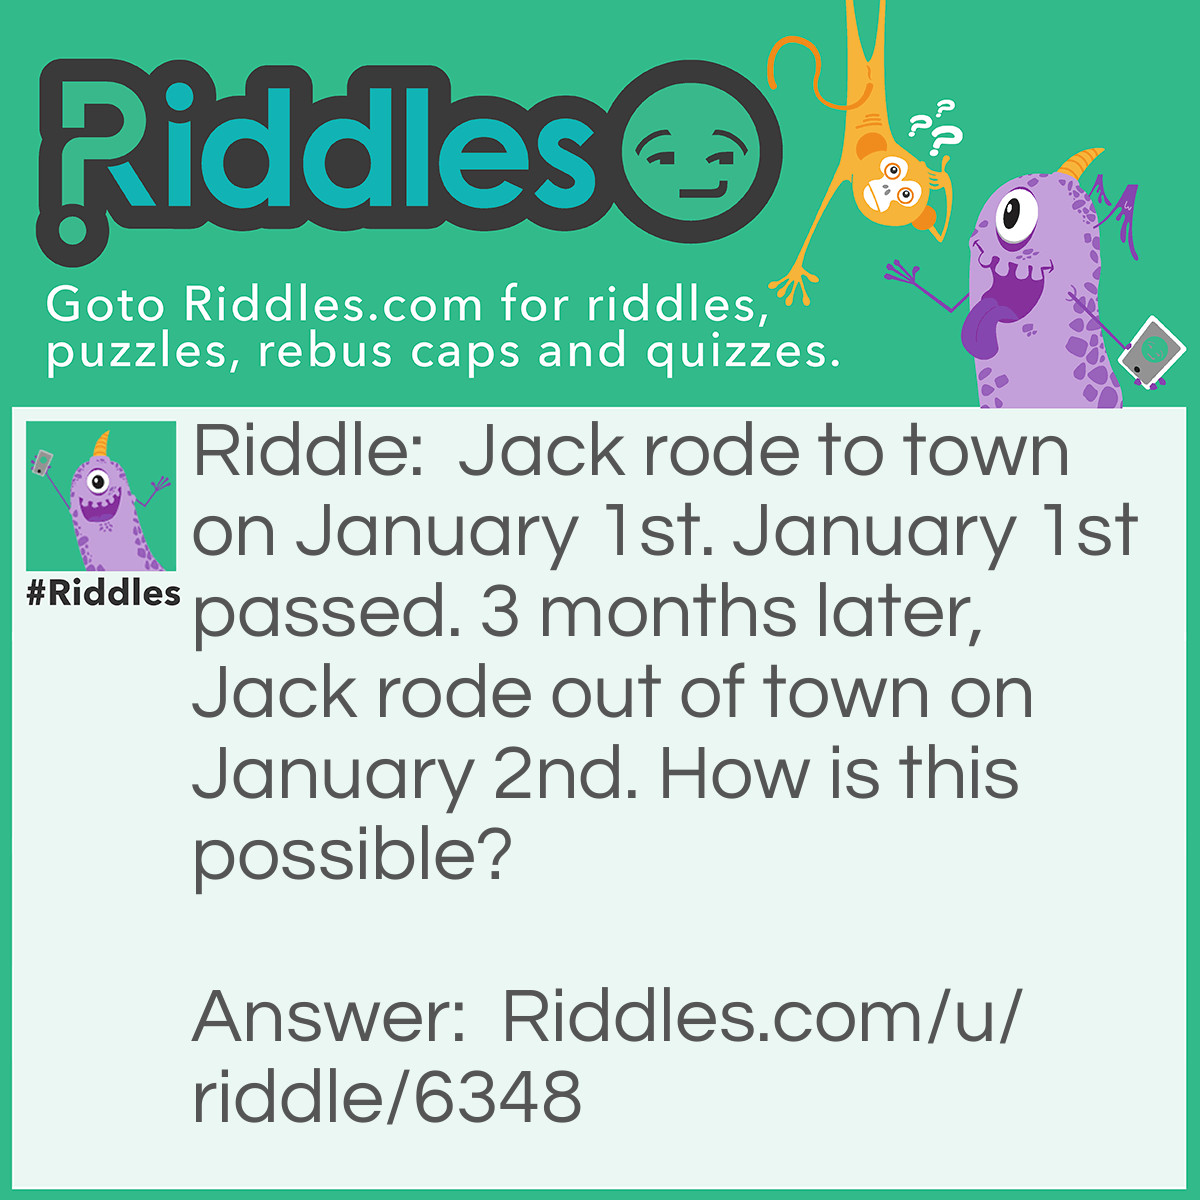 Riddle: Jack rode to town on January 1st. January 1st passed. 3 months later, Jack rode out of town on January 2nd. How is this possible? Answer: Jack’s horse was named January 1st. When it said that January 1st passed, that meant the horse passed away. 2 months later, Jack rode out of town on his new horse named January 2nd in honor of January 1st.